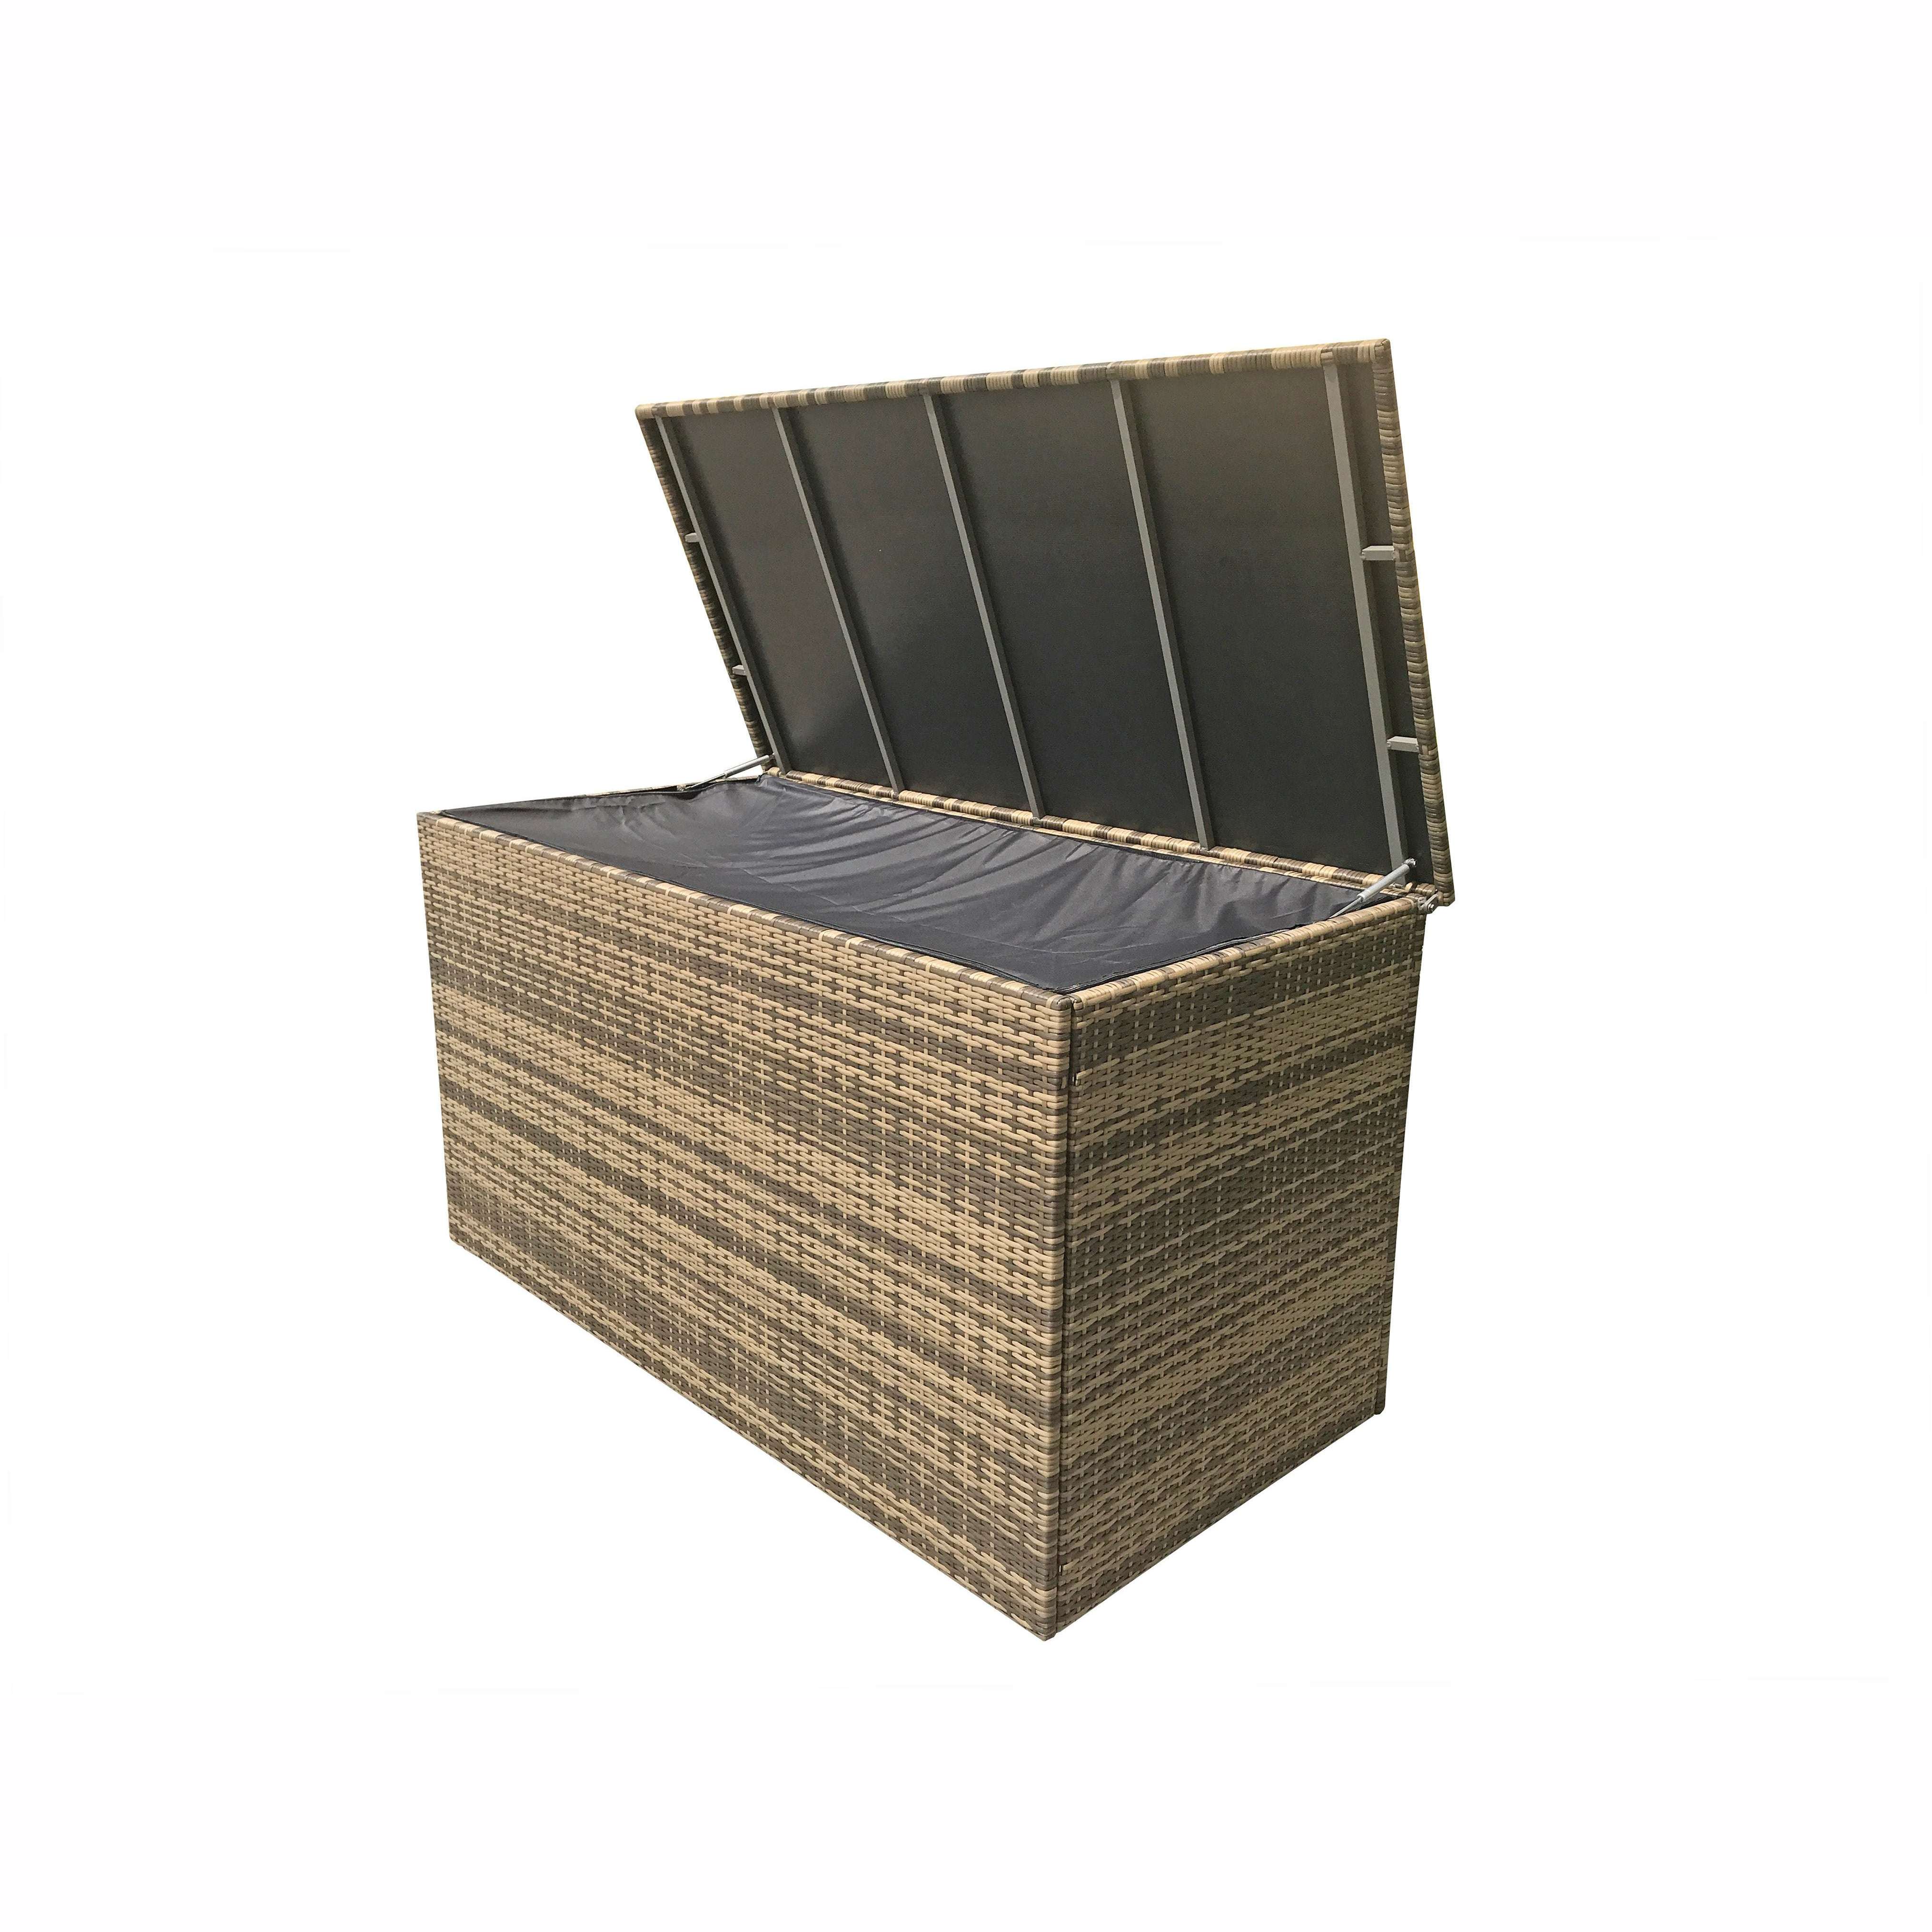 Exceptional Garden:Signature Weave Cushion Box - Large Flat Brown Weave